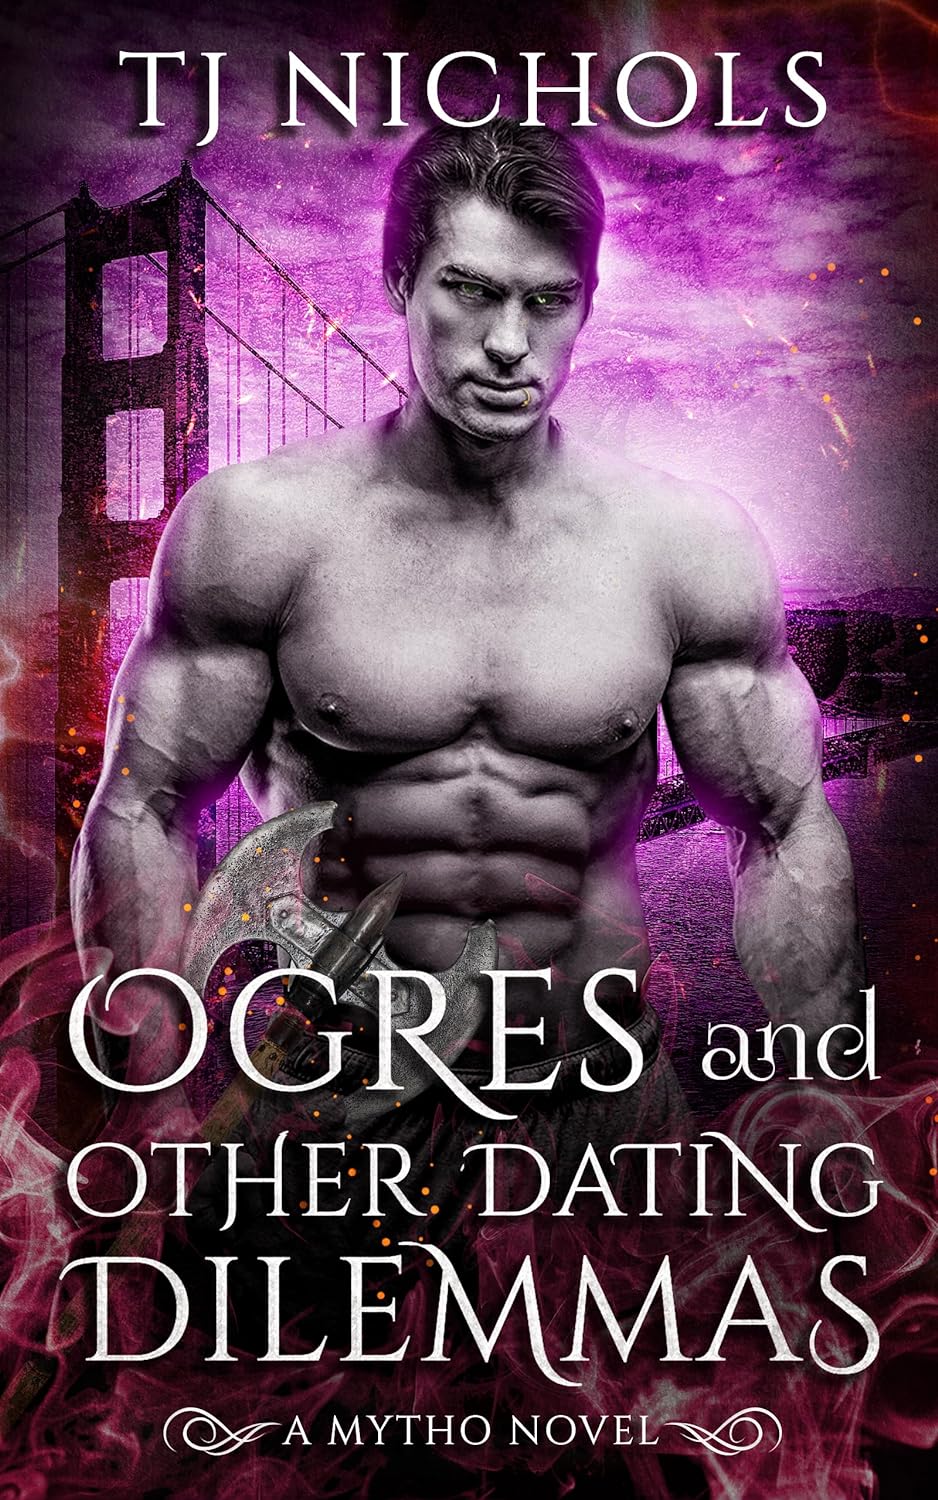 Ogres and other Dating Dilemmas by TJ Nichols